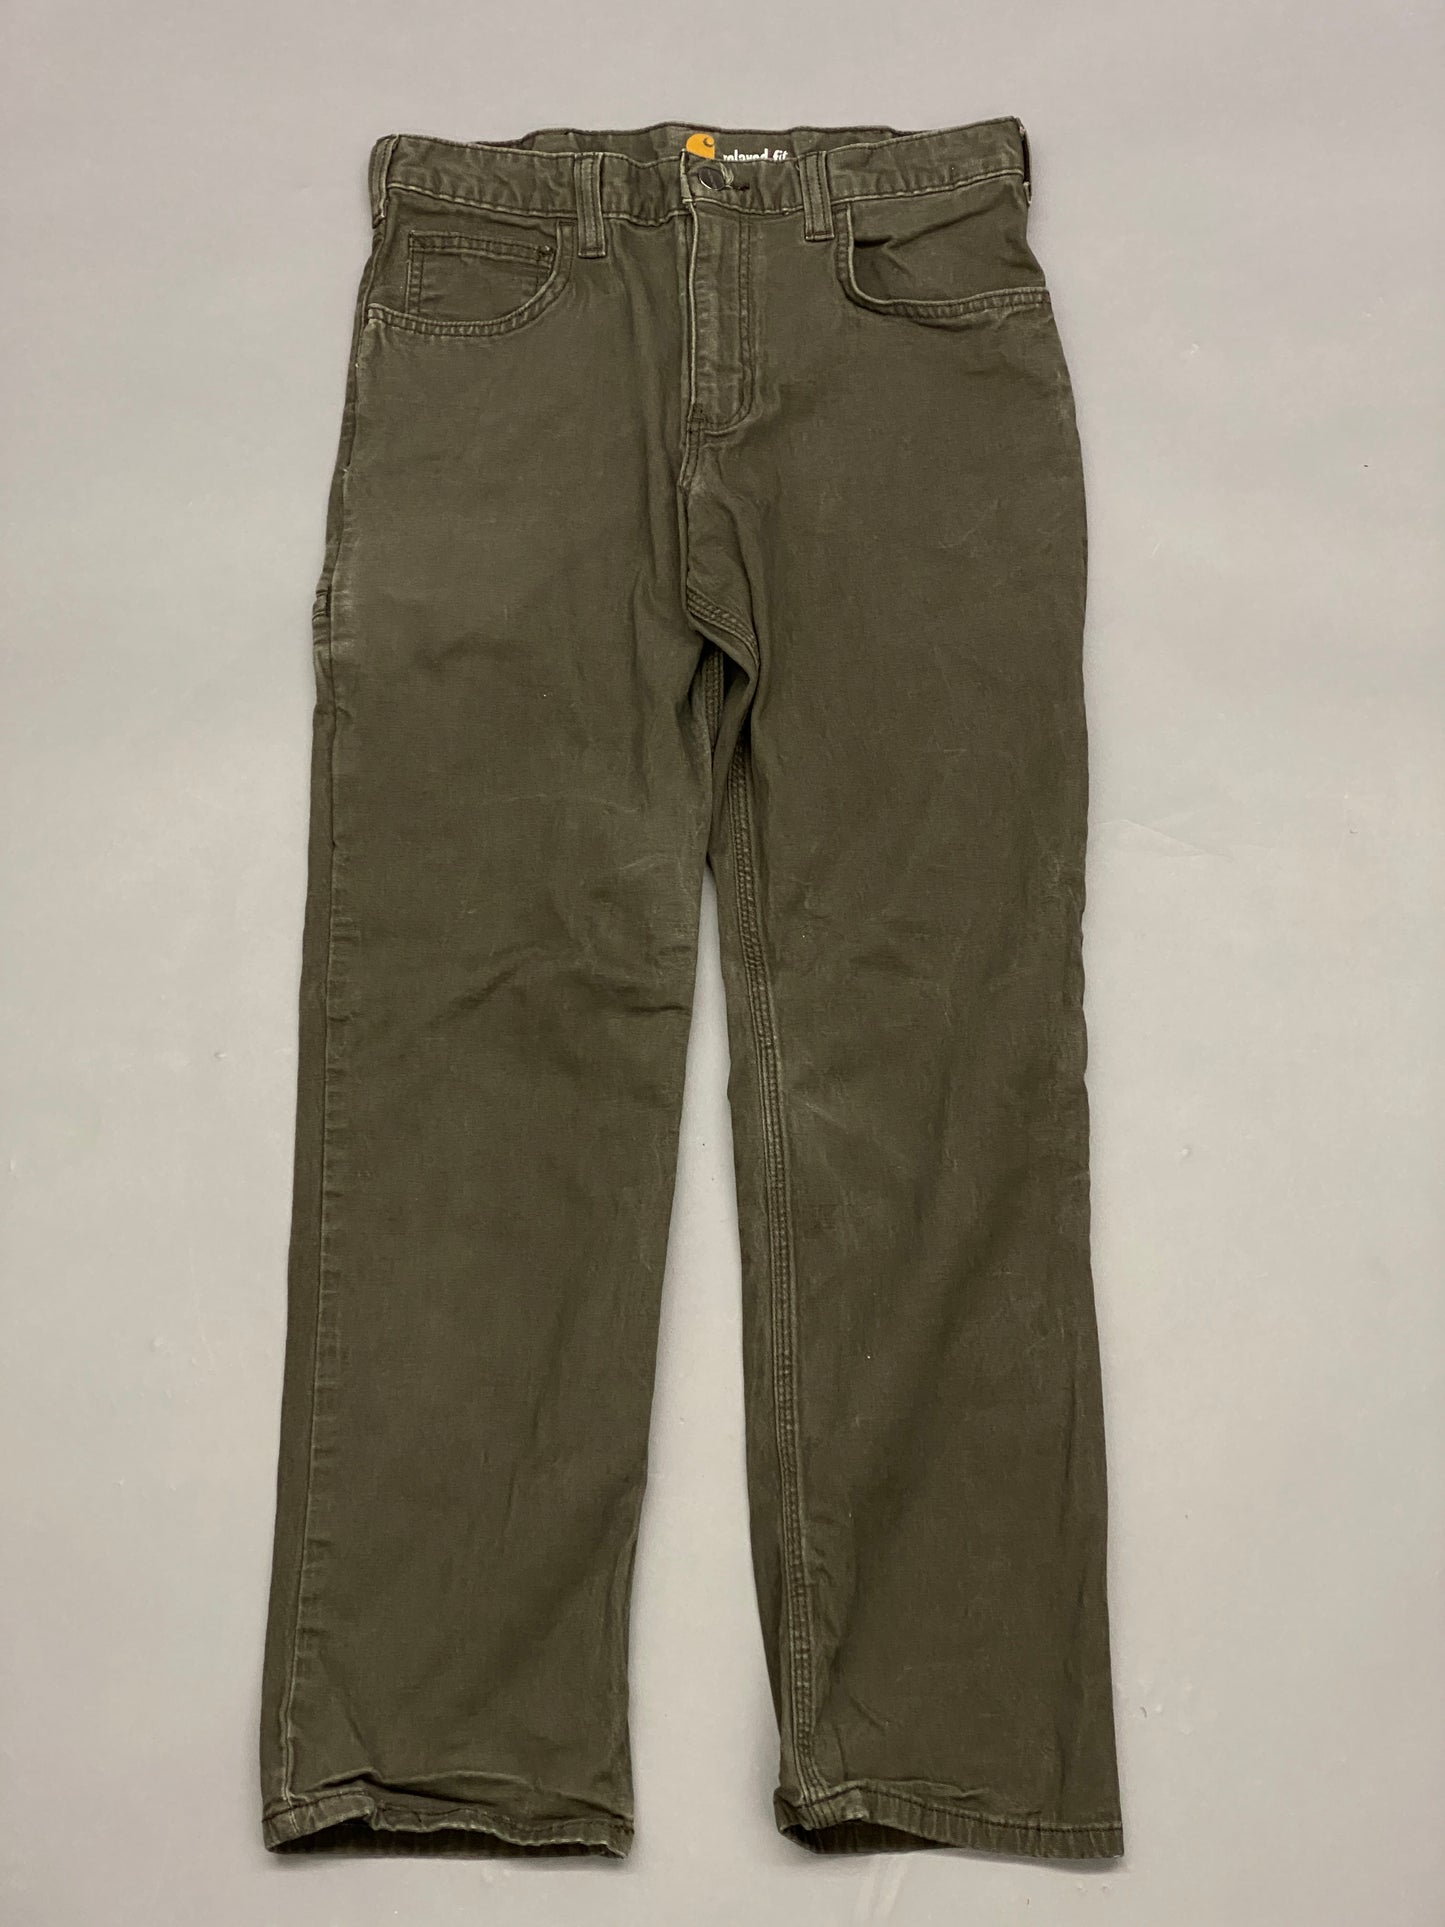 Carhartt Relaxed Fit Pants - 32 x 30